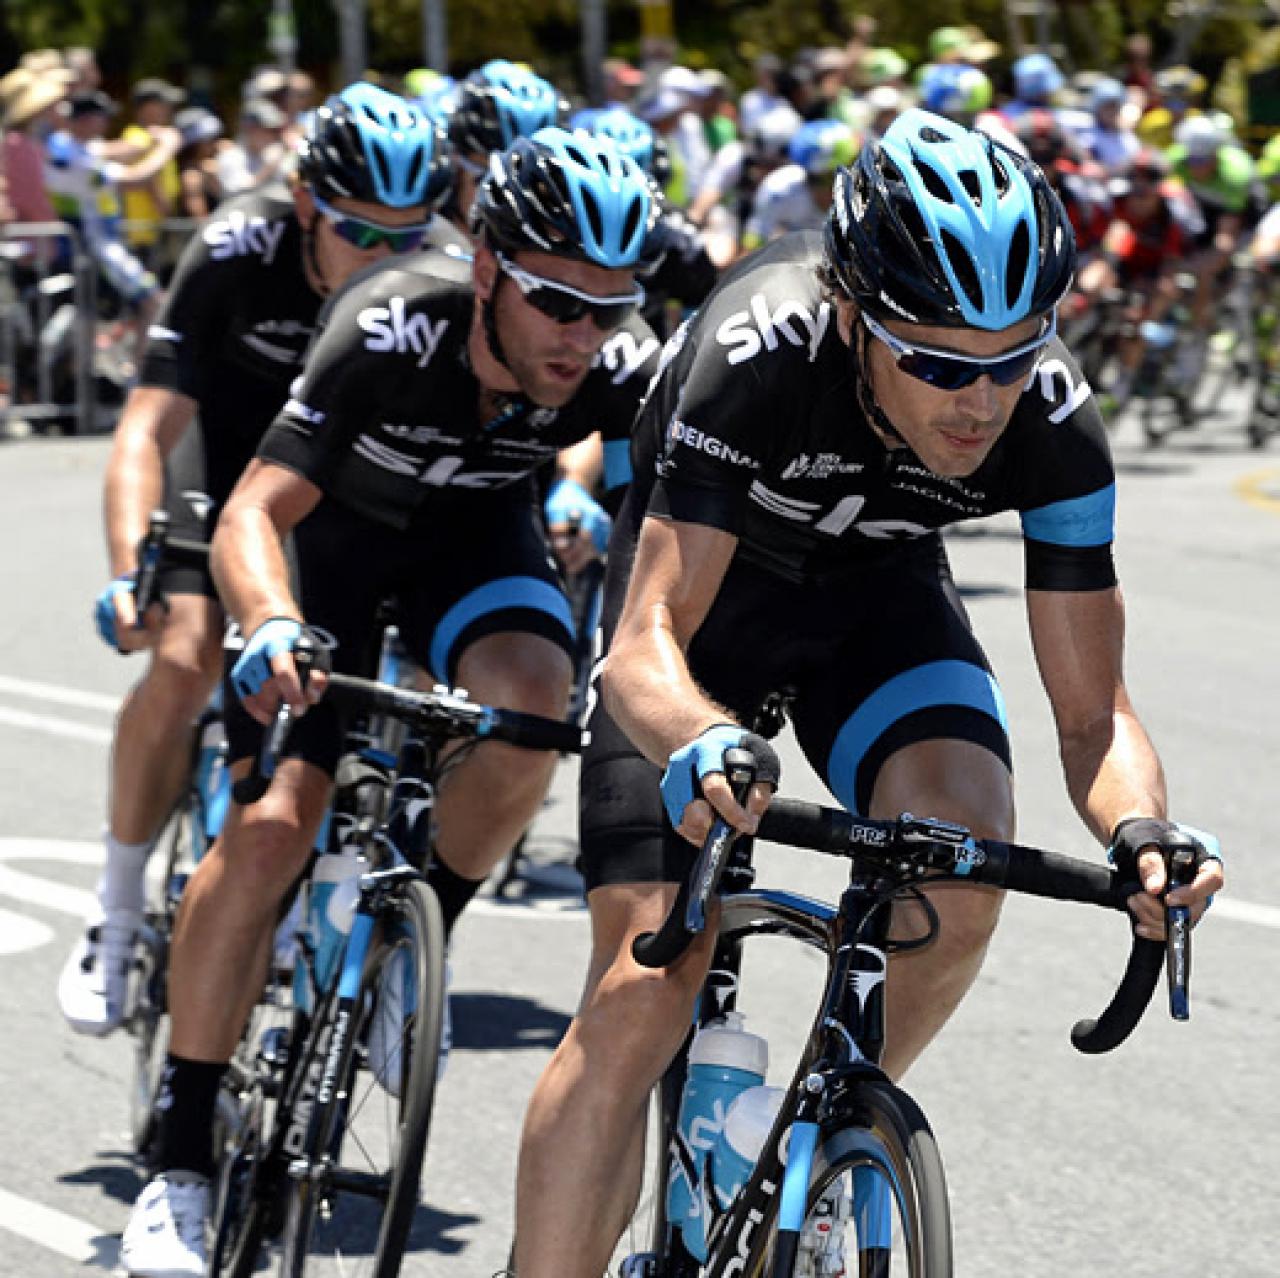 Jurassic Park hjælp derefter Kask extend partnership with Team Sky for another three years | road.cc